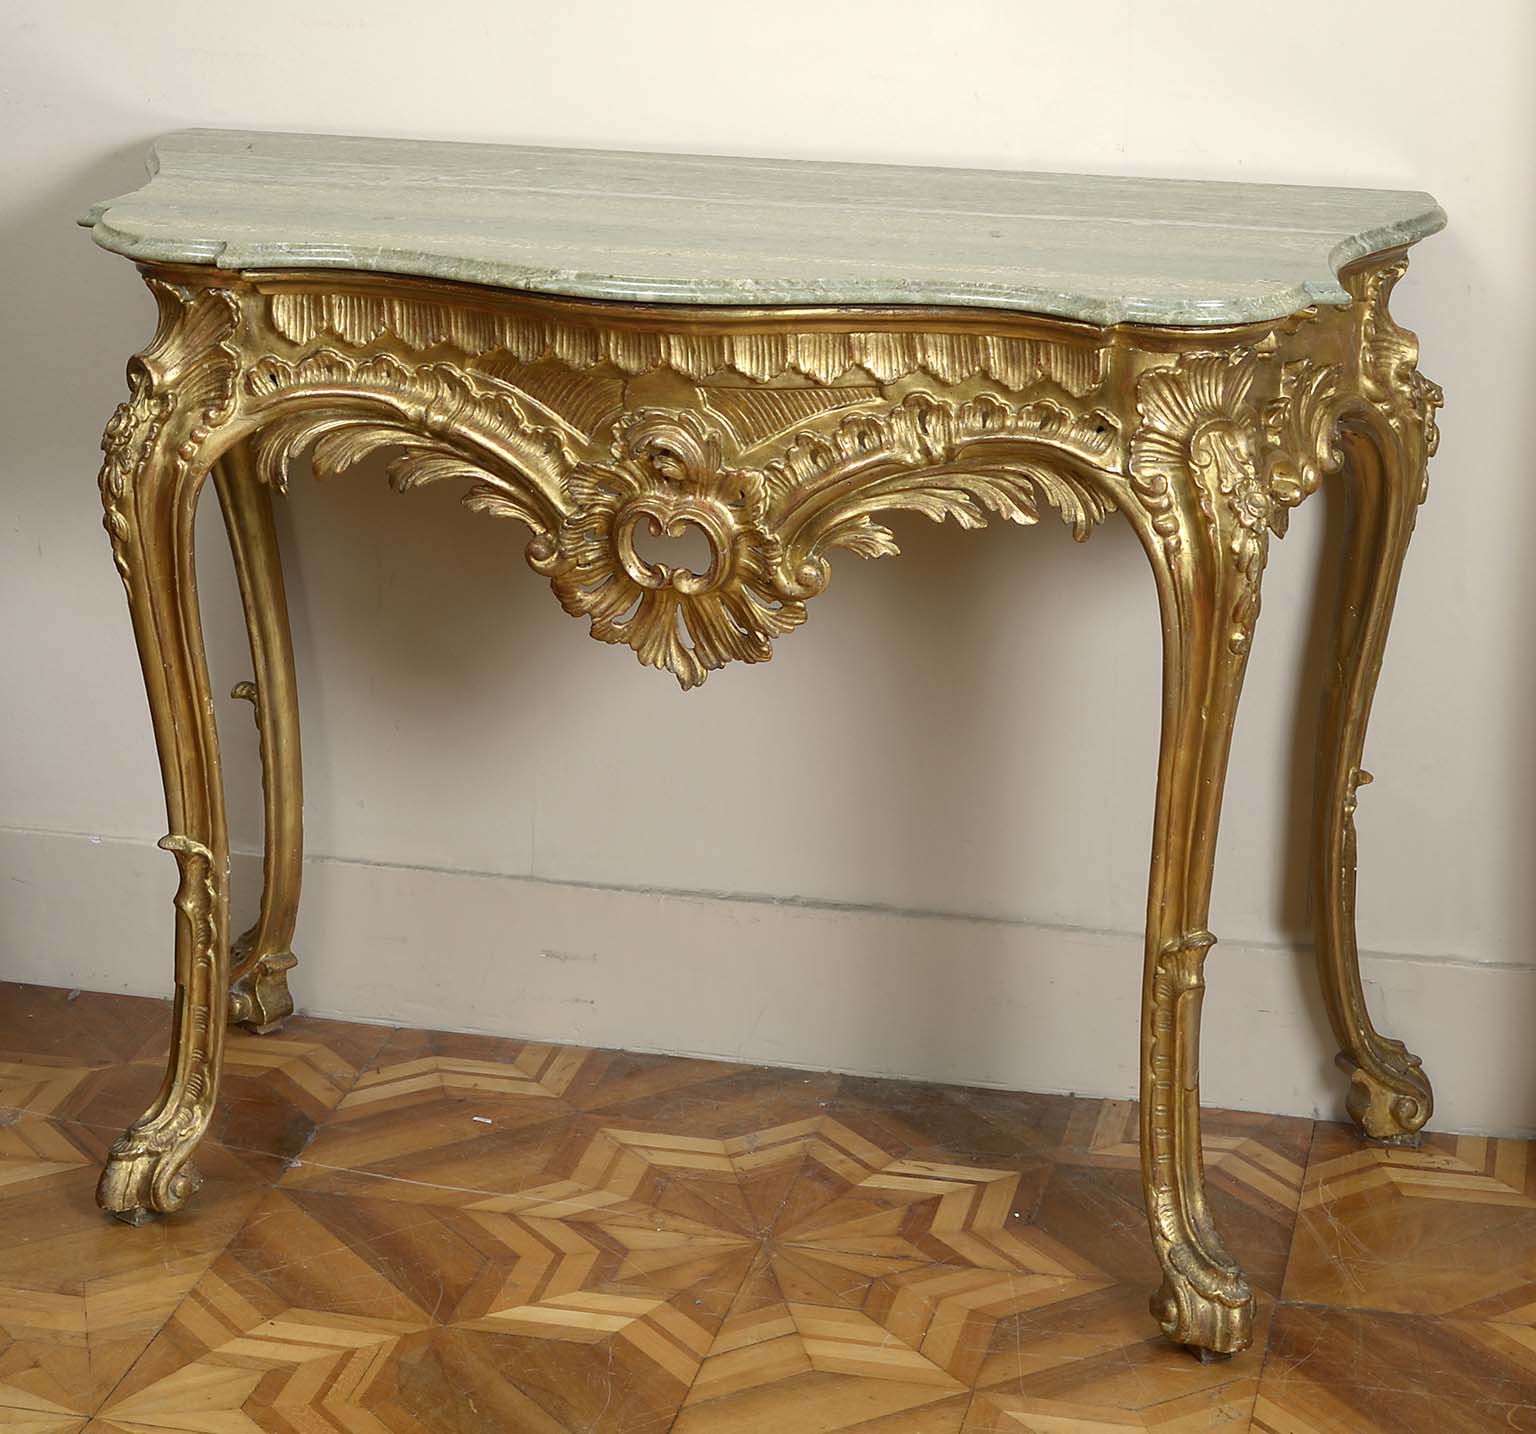 A Neopolitan Silver Gilt and Giltwood Console Table